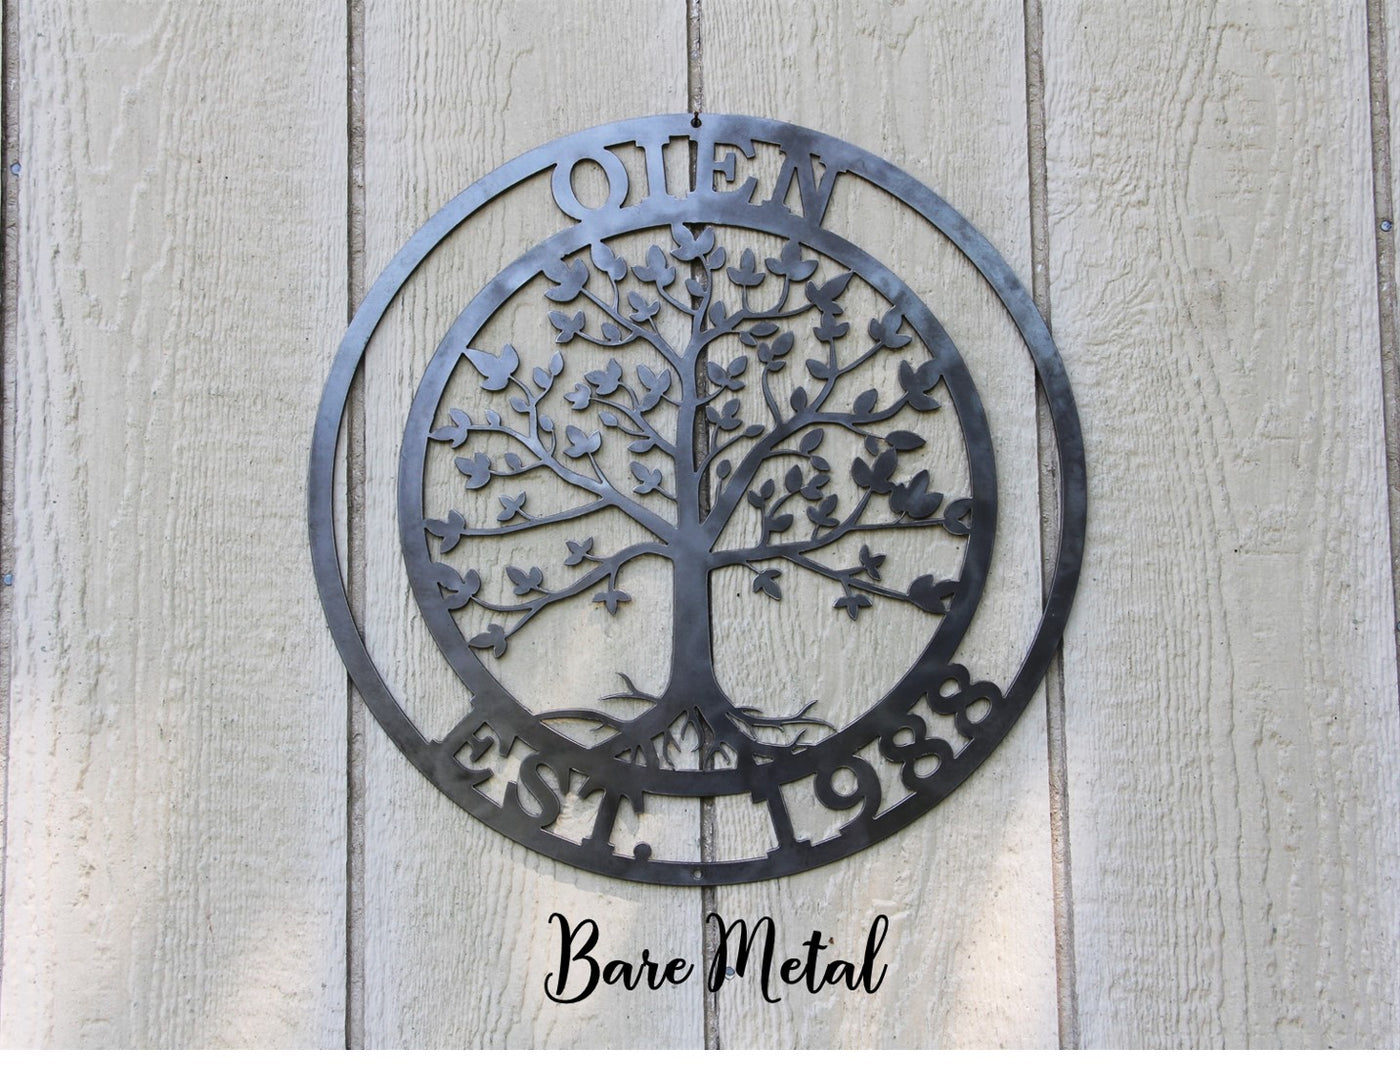 Personalized Tree of Life Family Sign - Madison Iron and Wood - Monogram Sign - metal outdoor decor - Steel deocrations - american made products - veteran owned business products - fencing decorations - fencing supplies - custom wall decorations - personalized wall signs - steel - decorative post caps - steel post caps - metal post caps - brackets - structural brackets - home improvement